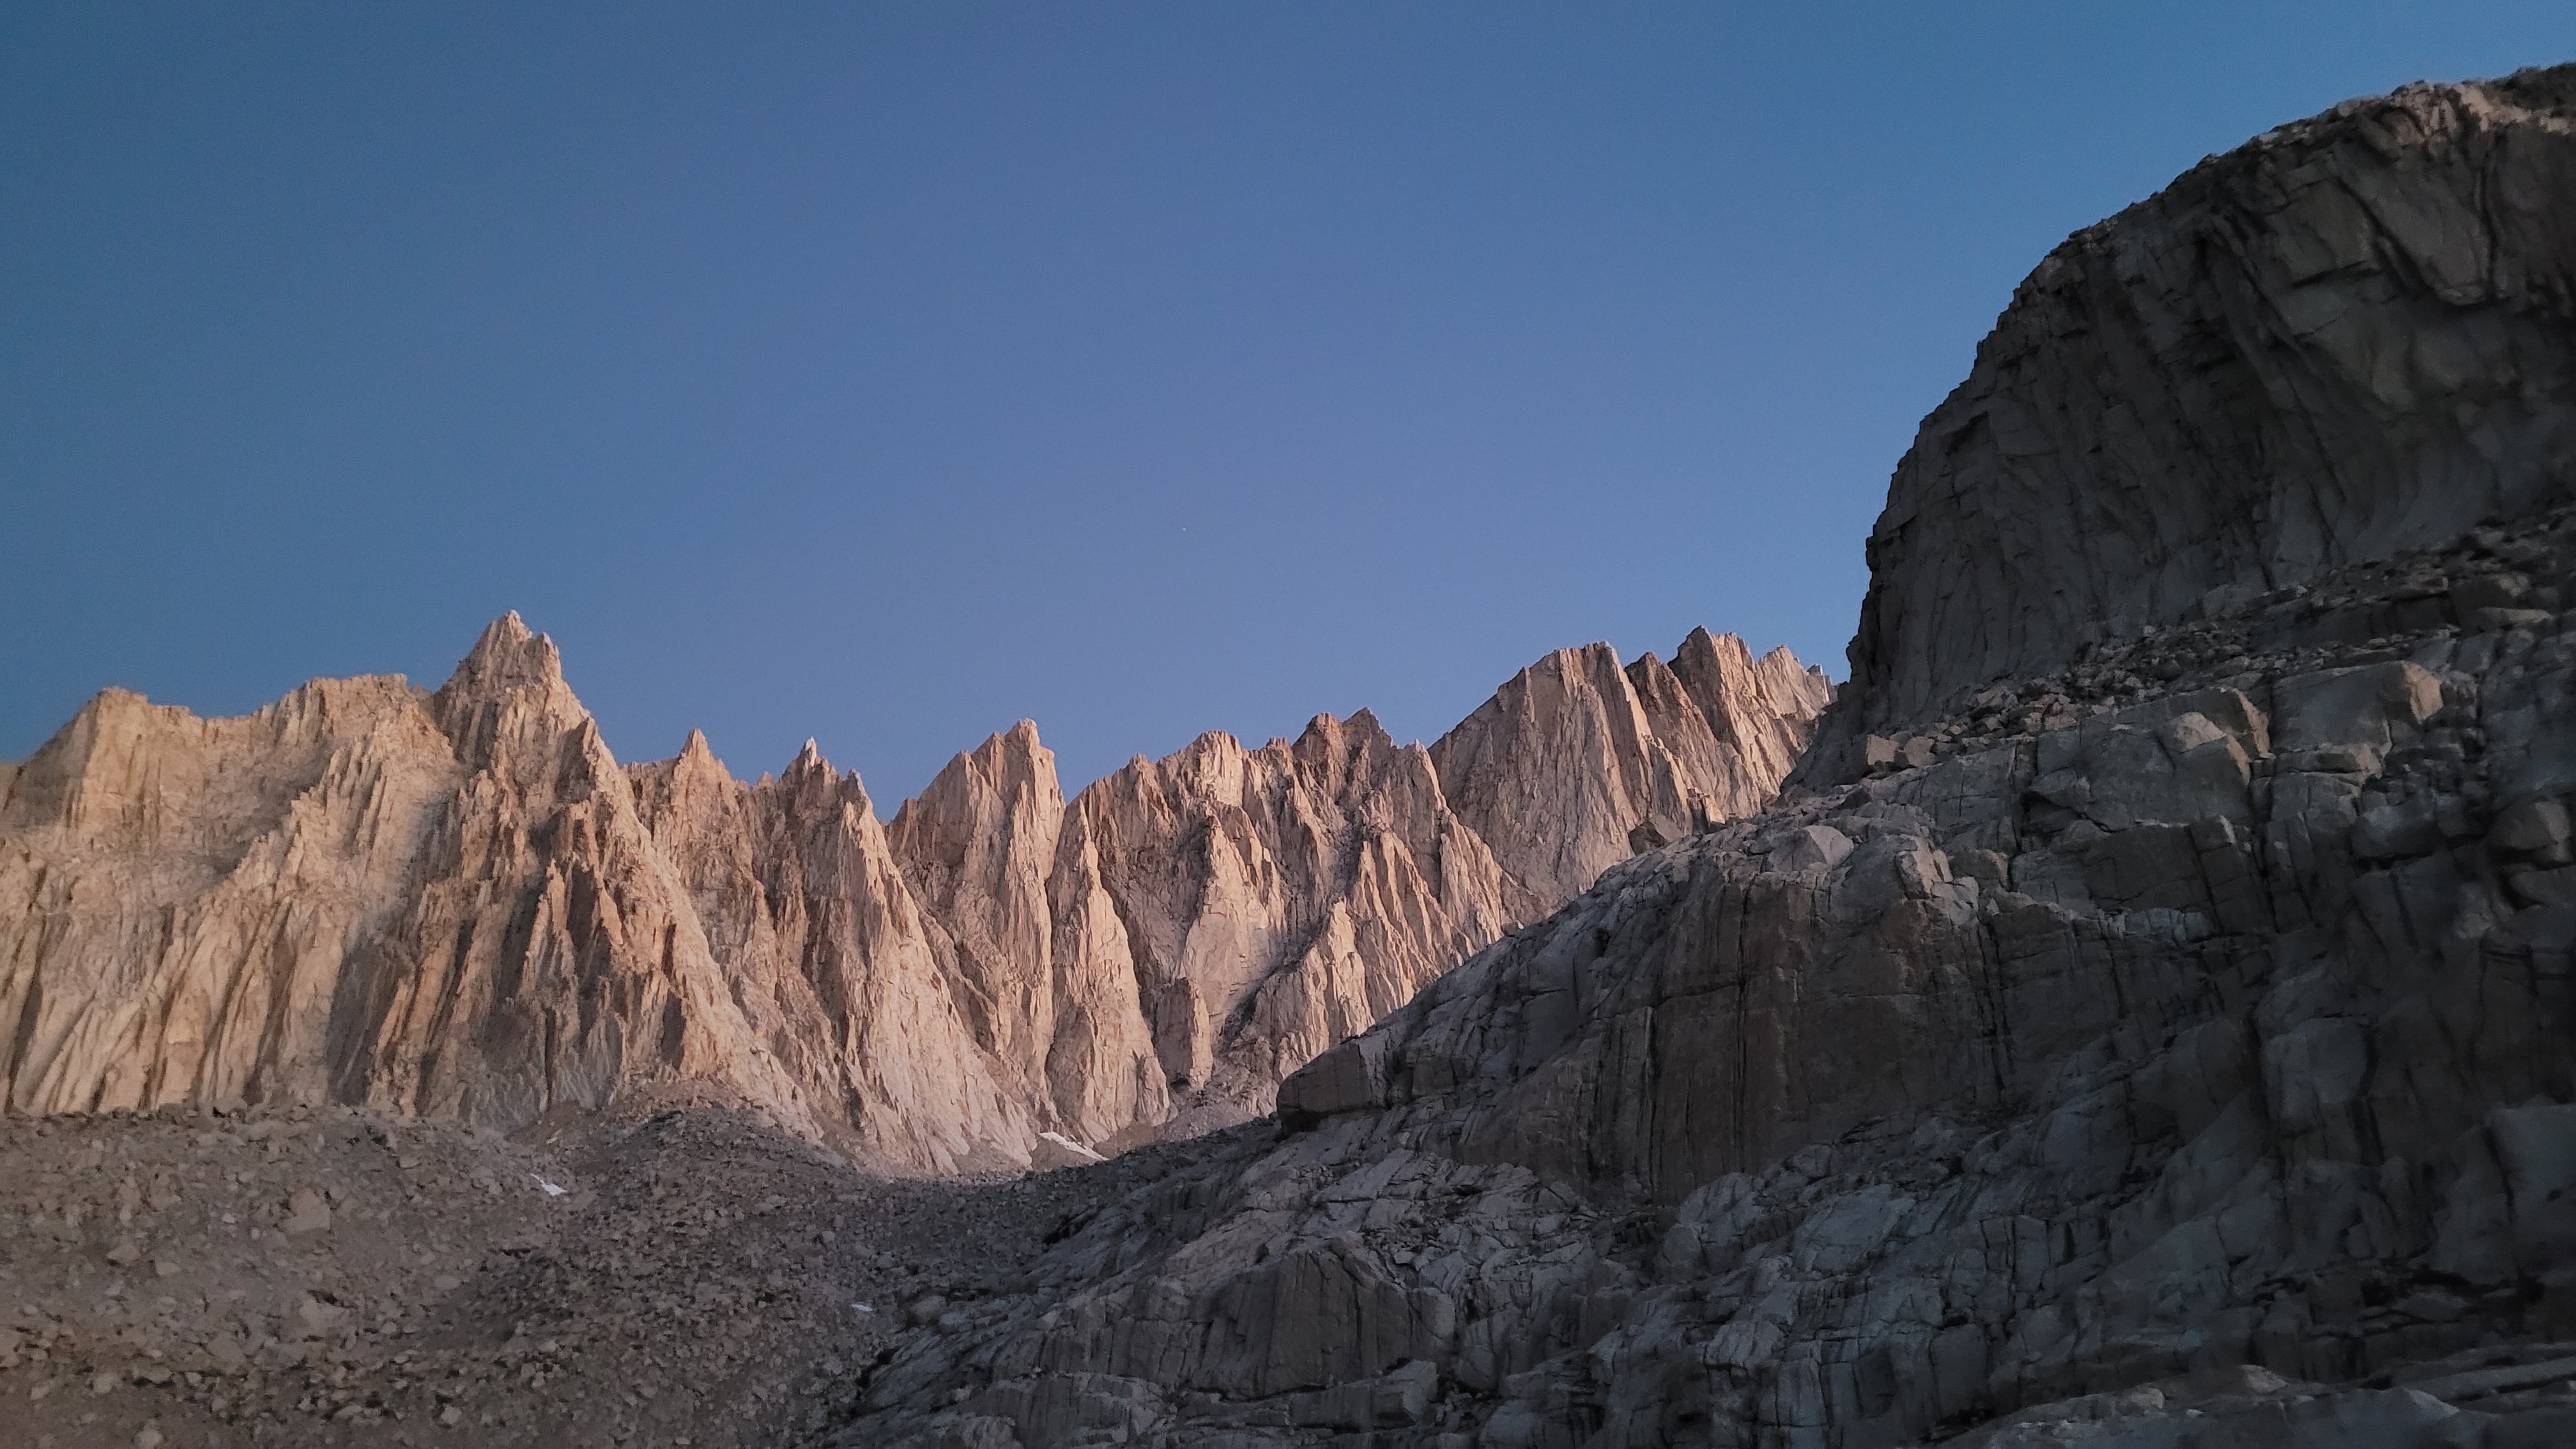 Mount Whitney and nearby peaks seen from our campsite the following morning